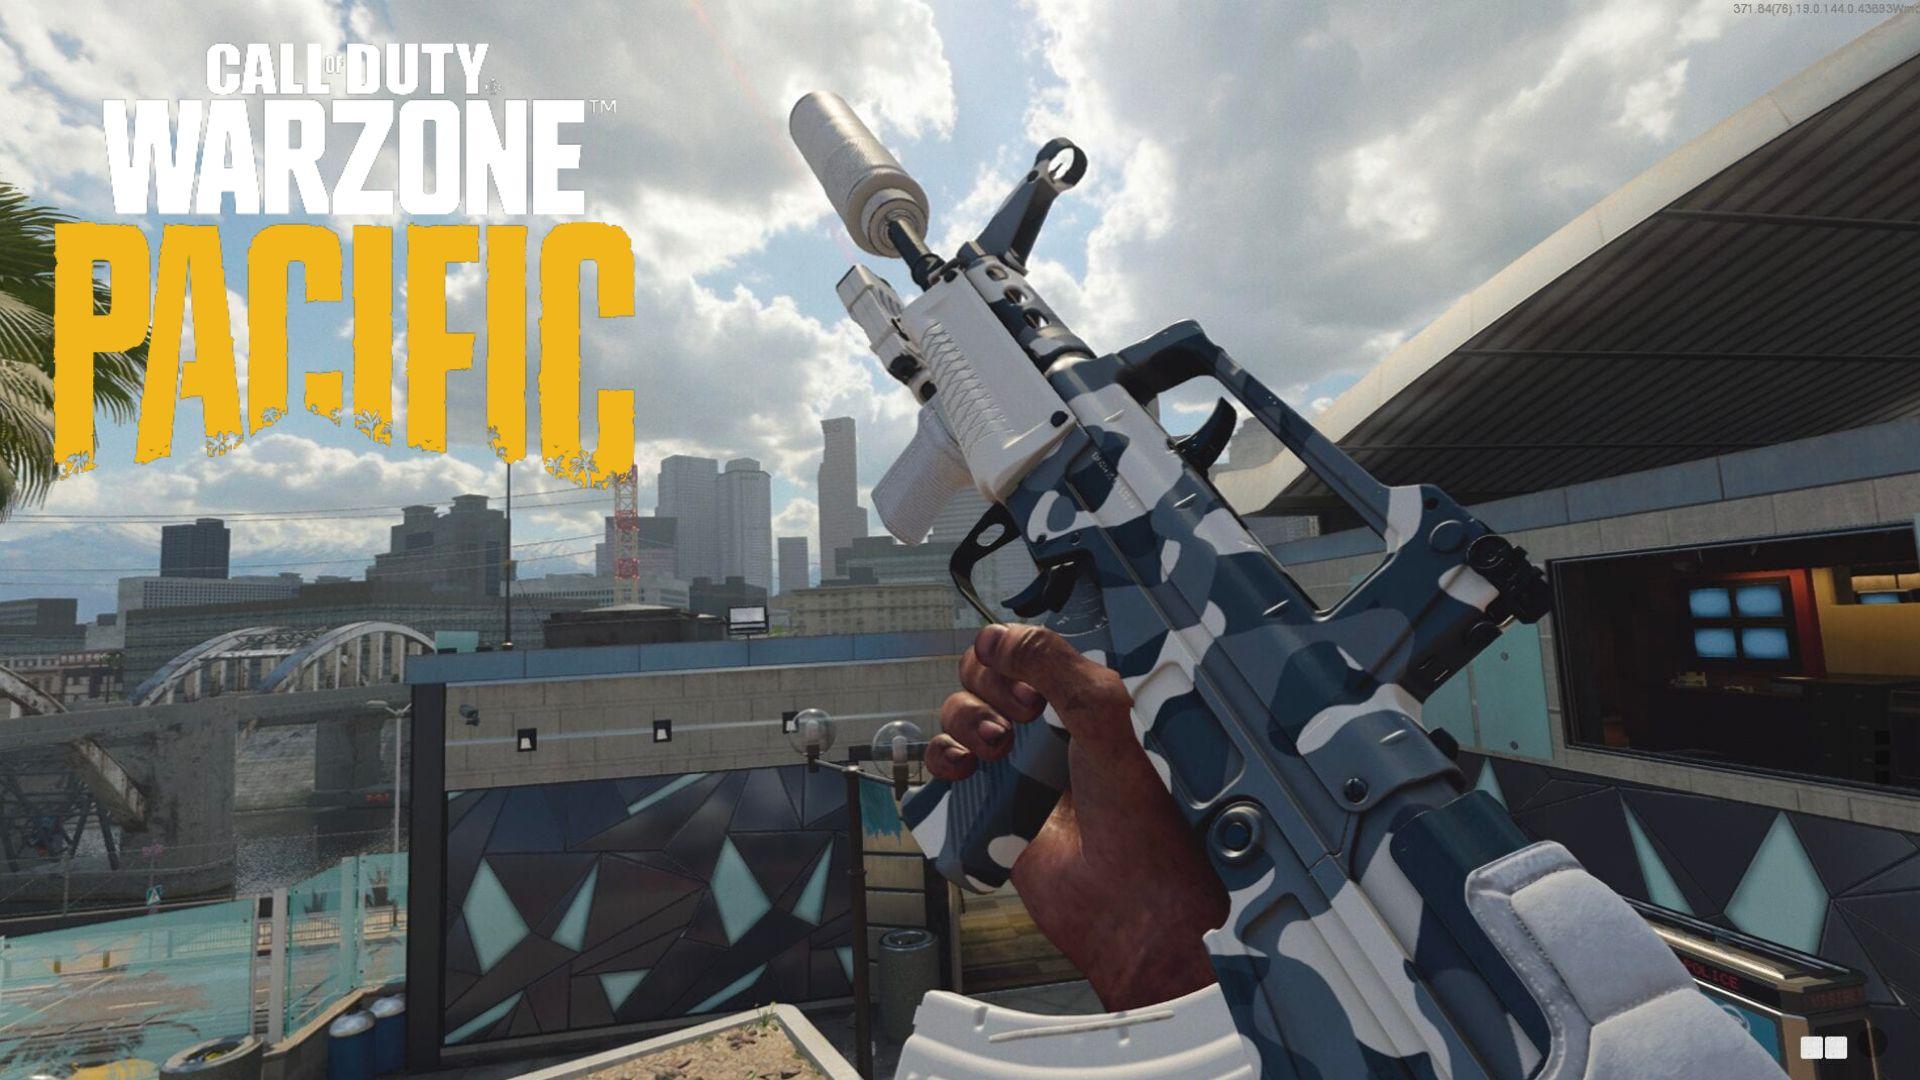 QBZ being held aloft with blue and white skin next to Warzone Pacific logo